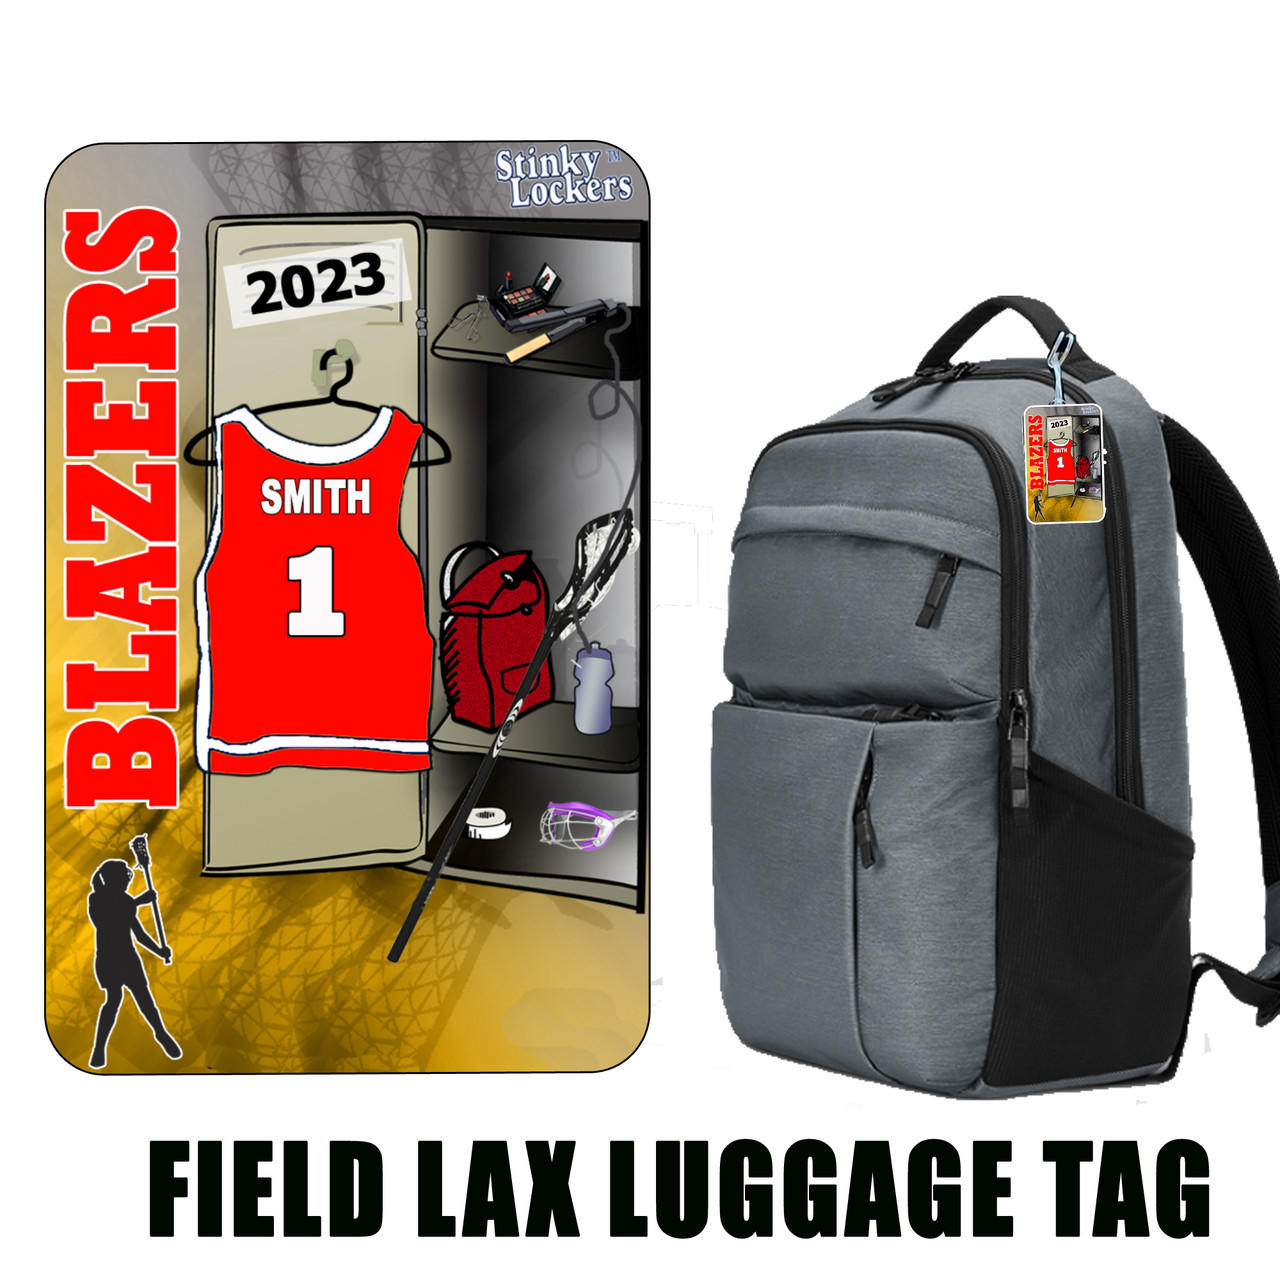 Personalized Field Lacrosse Luggage Bag Tag with Loop Questions & Answers